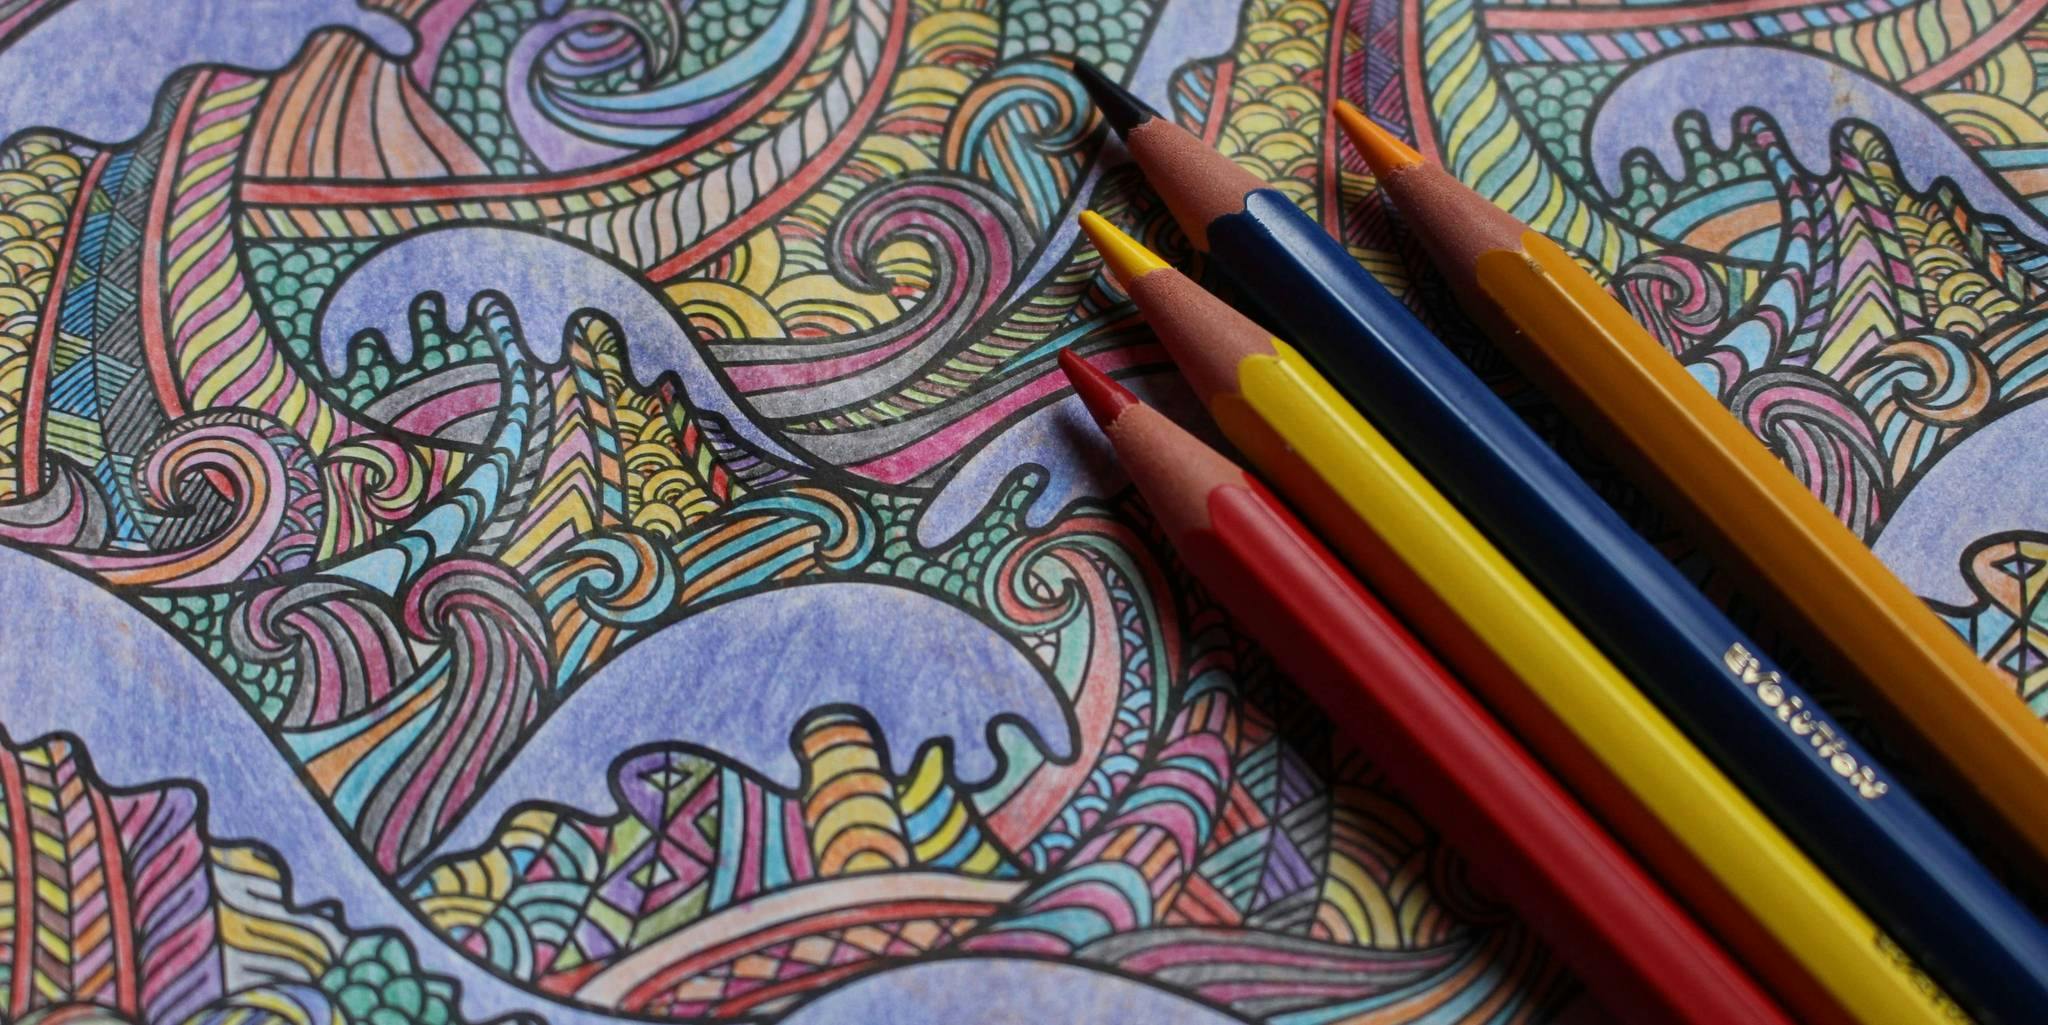 8 geeky coloring books for adults